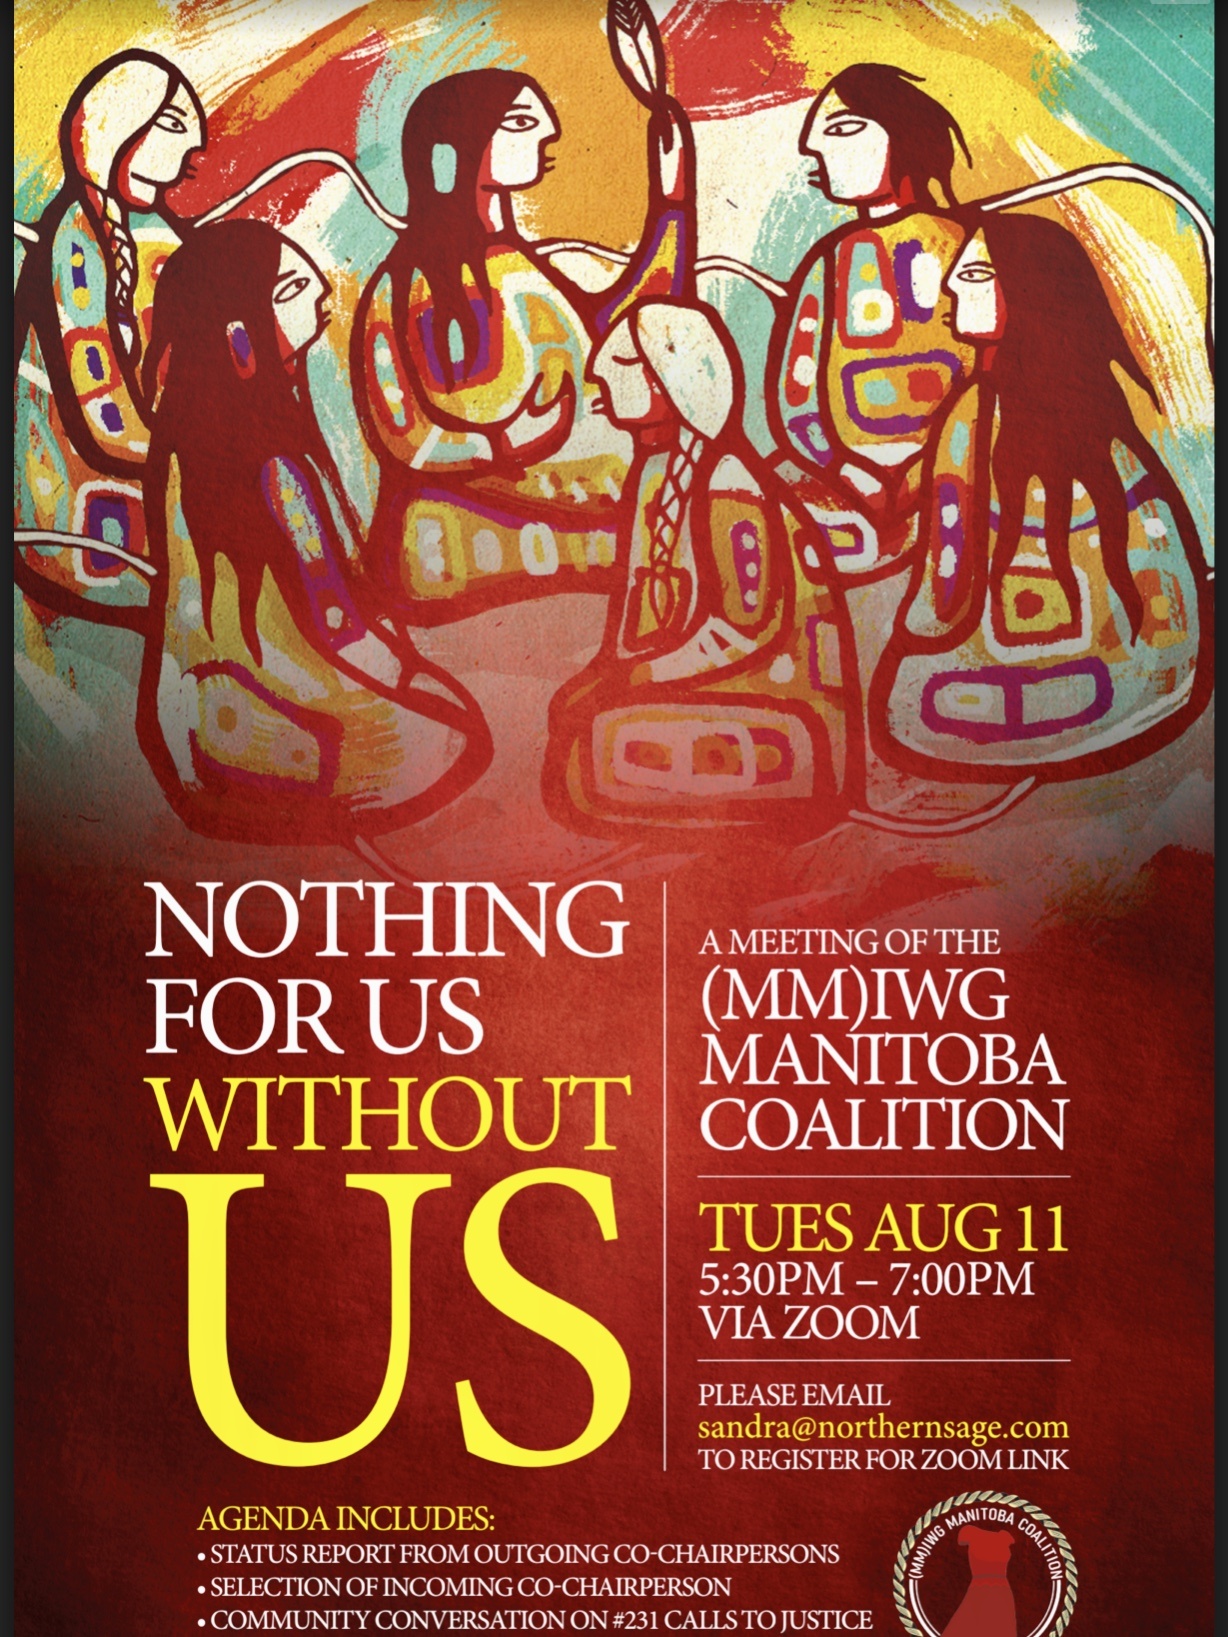 Nothing For Us Without Us - A meeting of the (MM)IWG Coalition